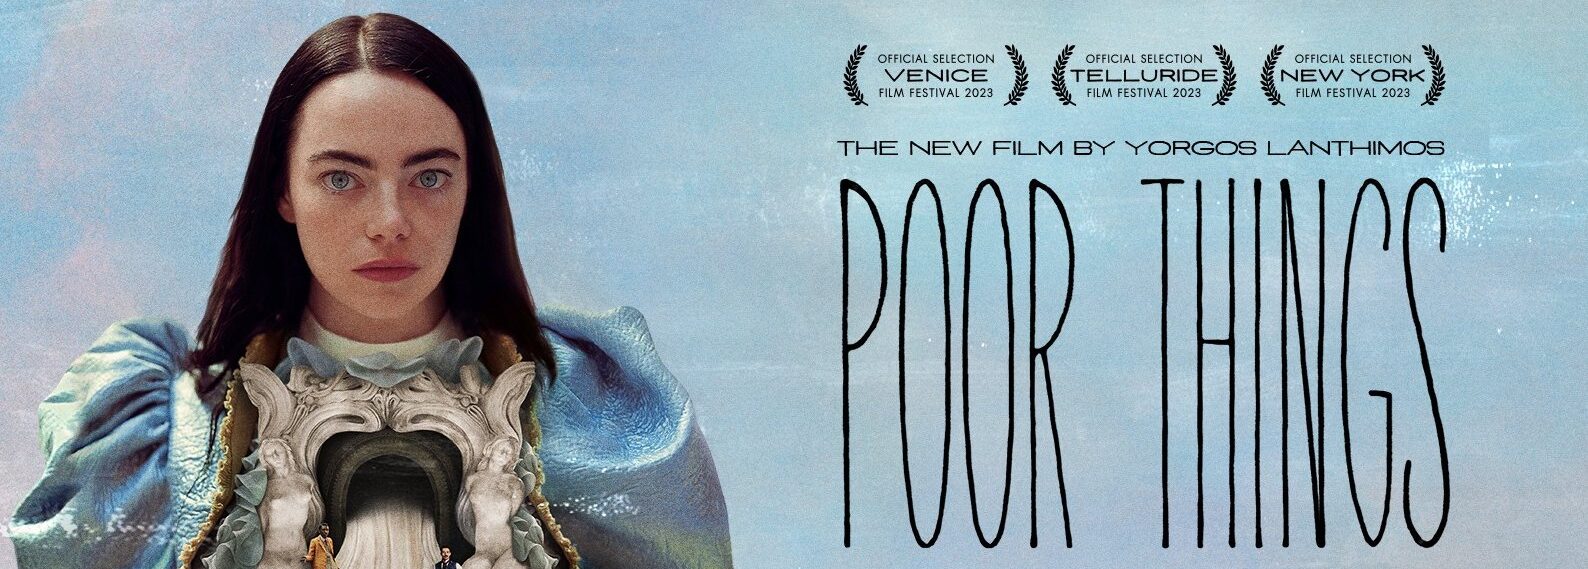 title poster for Poor Things